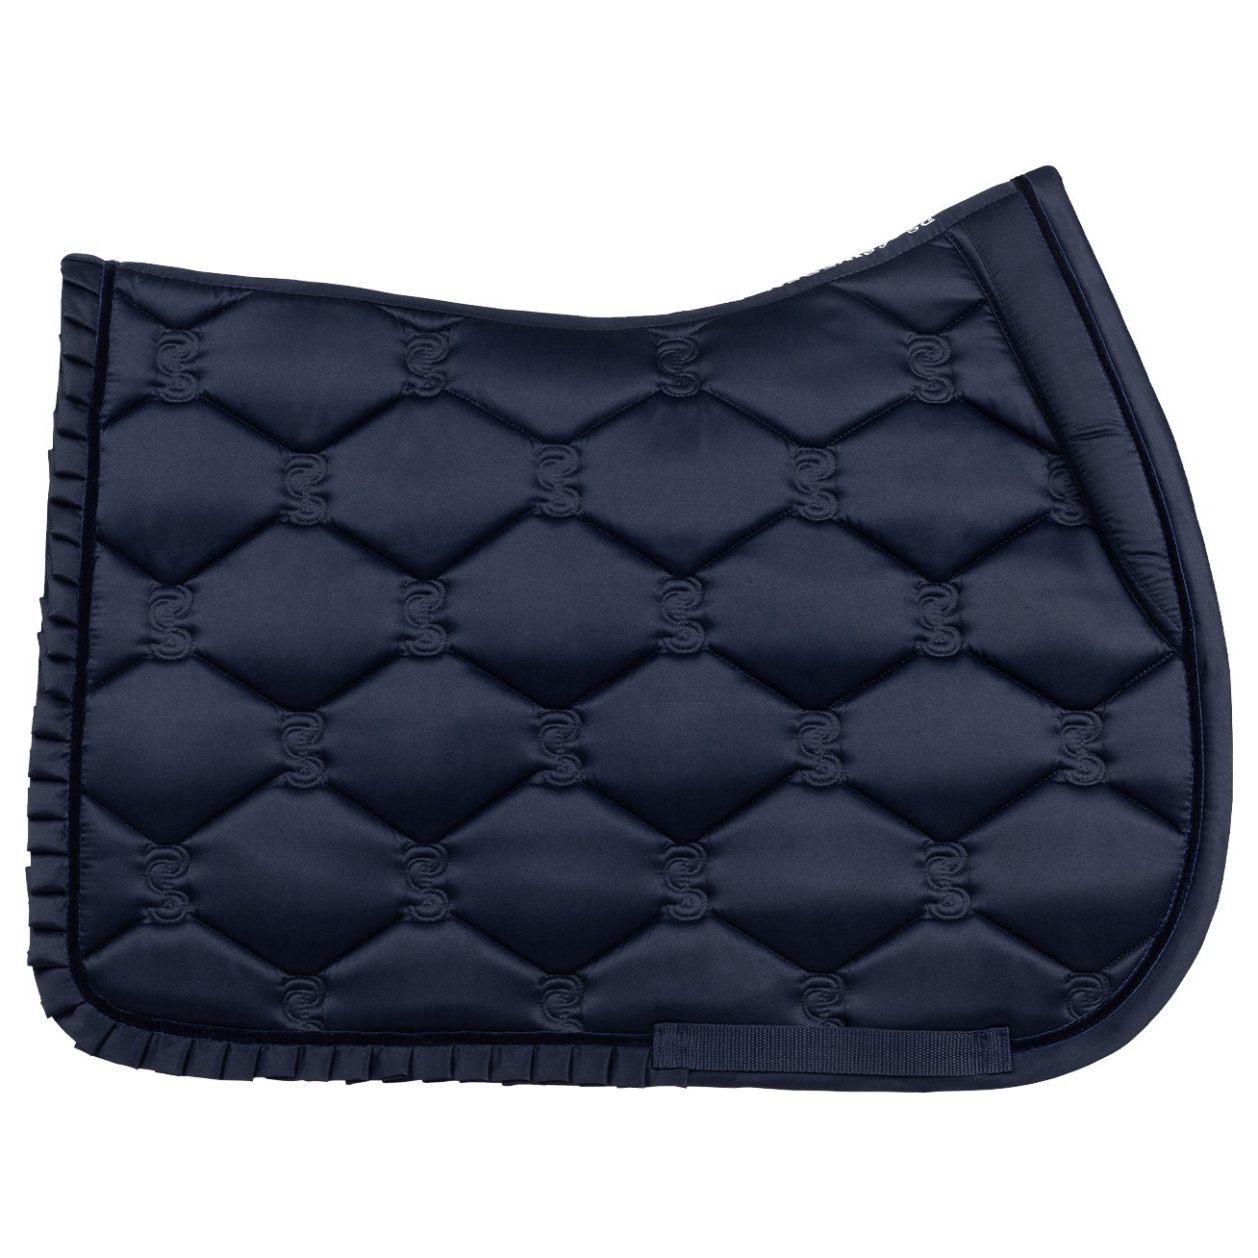 PS of Sweden Jumping Saddle Pad Ruffle SS23 | FUNDIS Equestrian